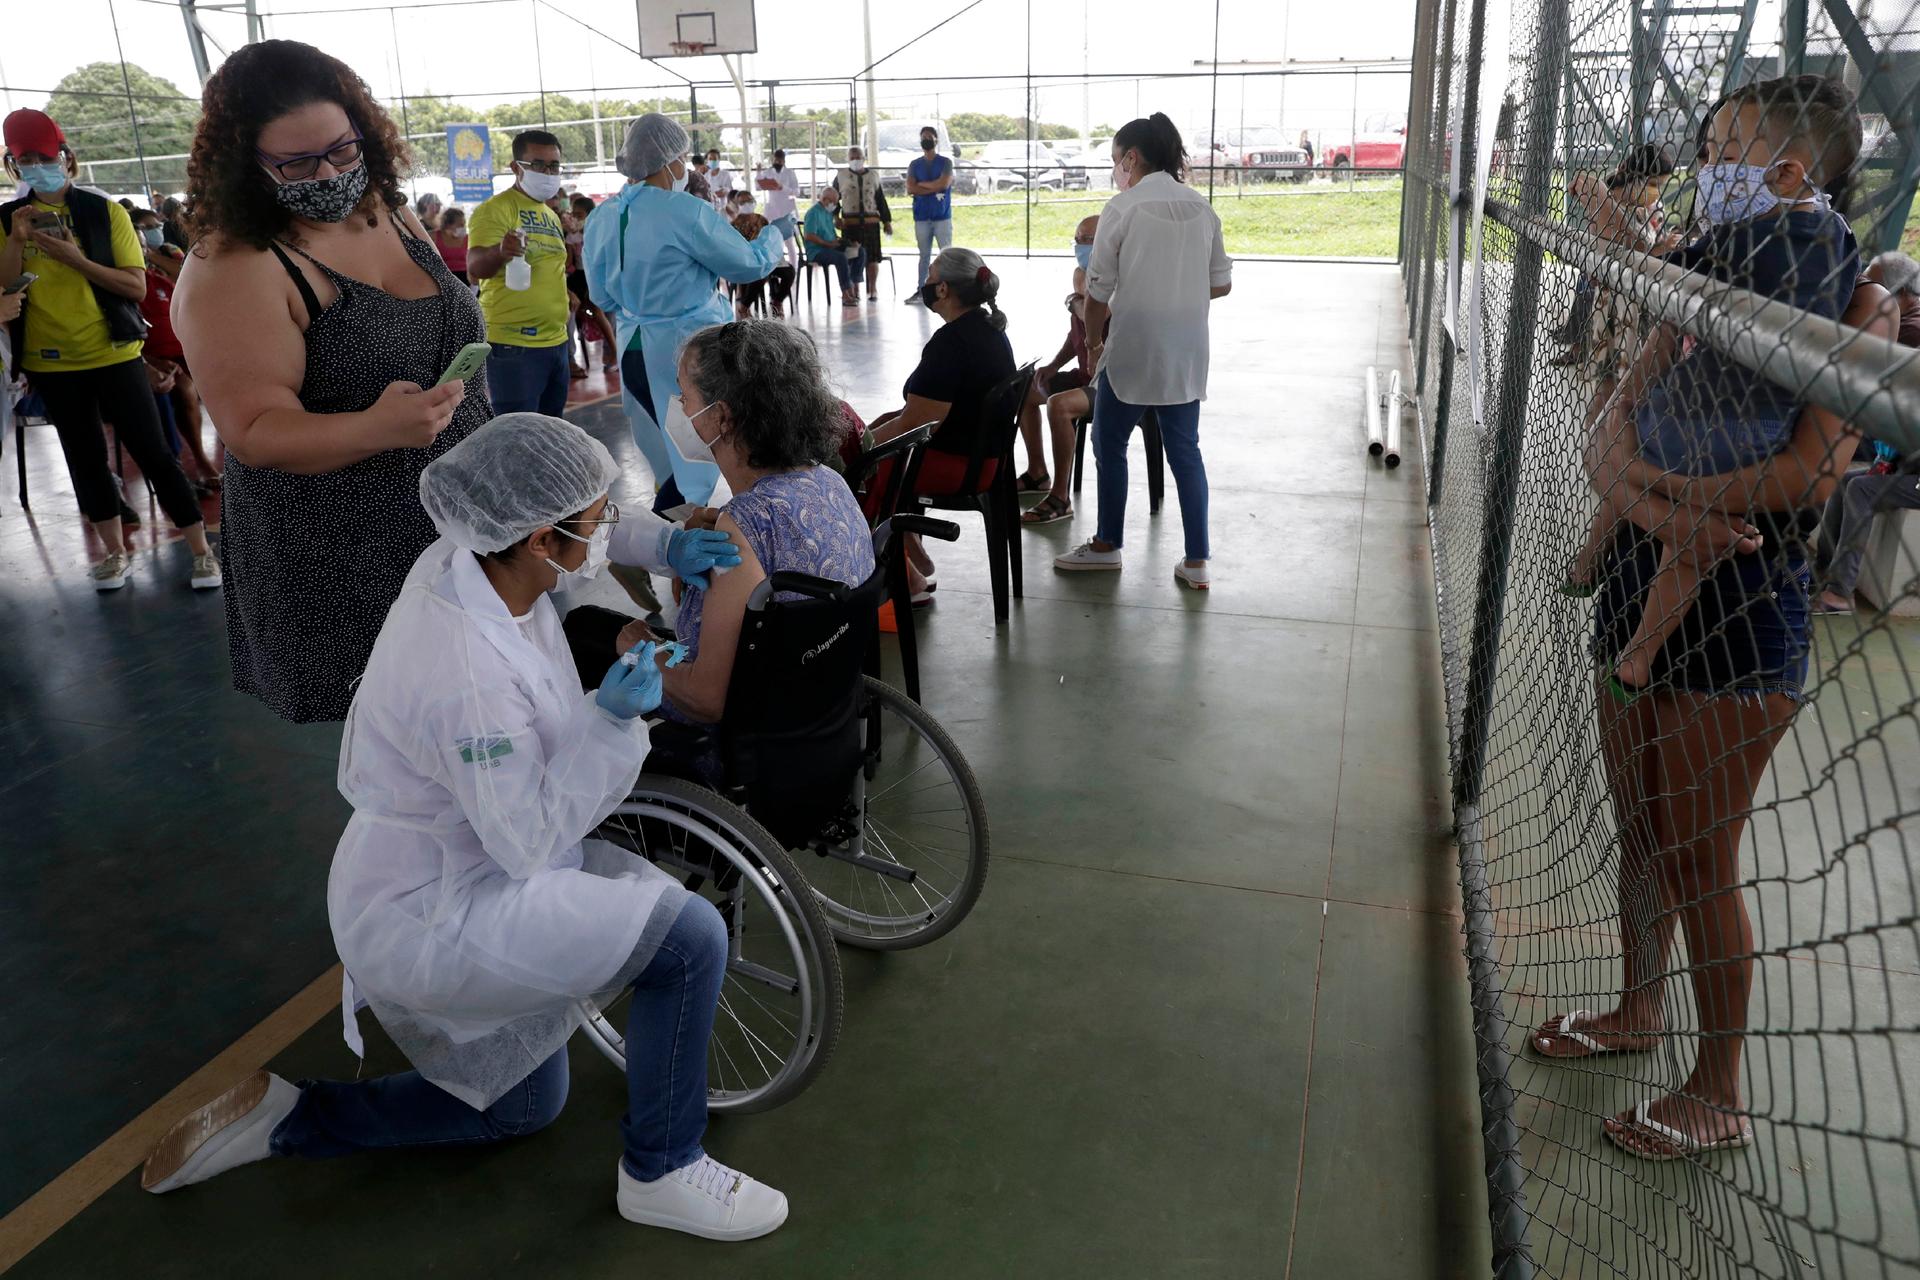 A health worker inoculates a woman at a COVID-19 vaccination point for priority elderly persons in the Ceilandia neighborhood, on the outskirts of Brasilia, Brazil, March 22, 2021.